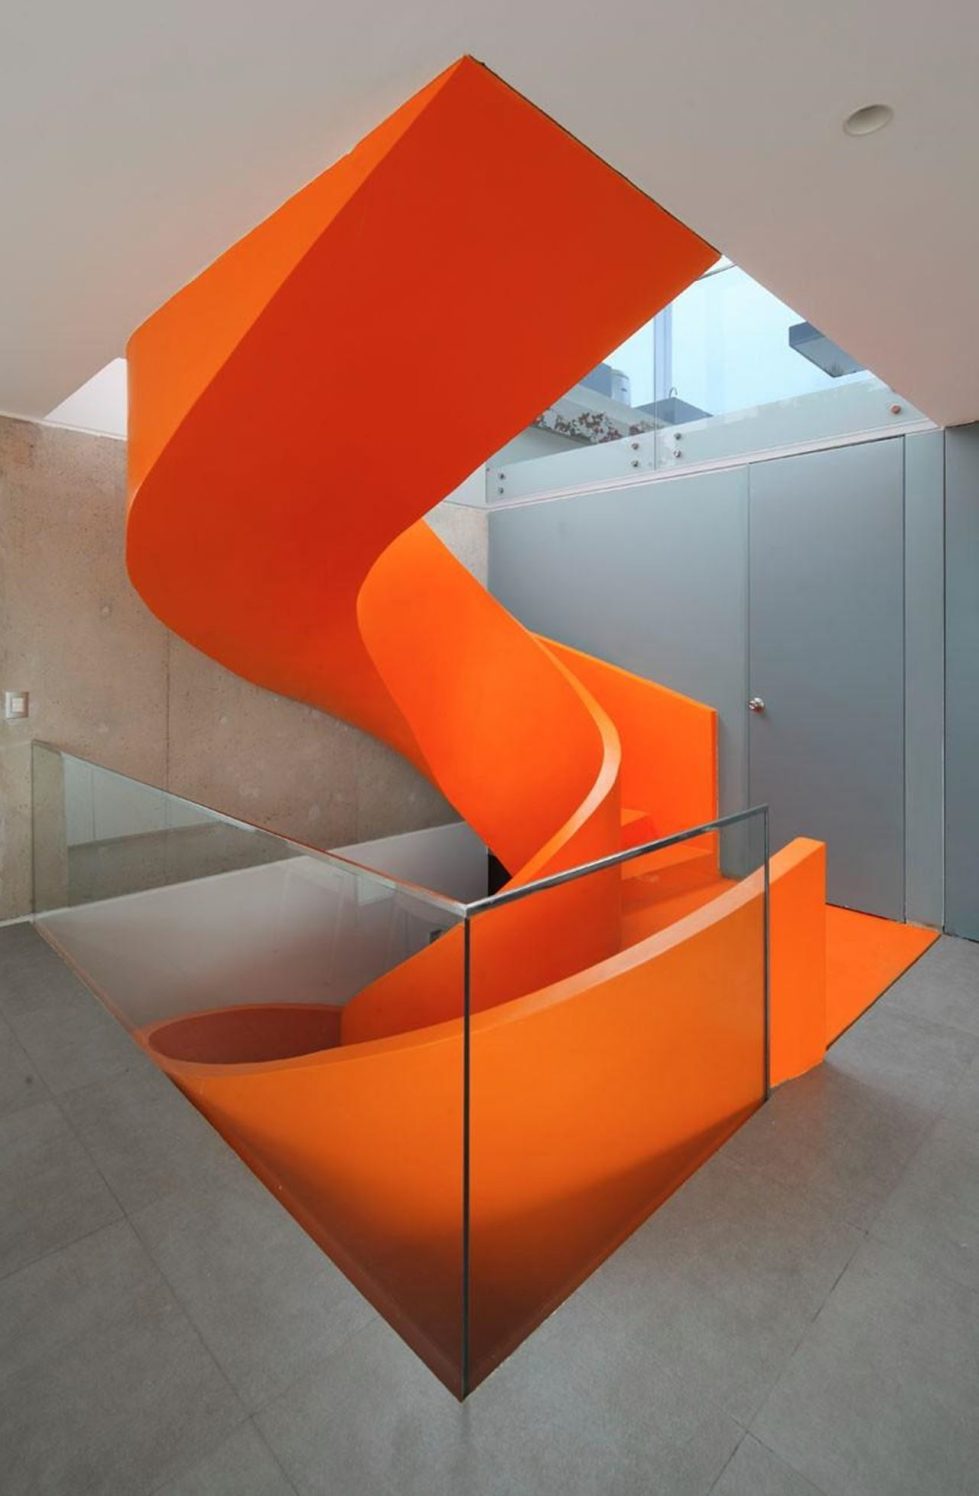 Attractive Open-Terraced House with Orange Staircase 4